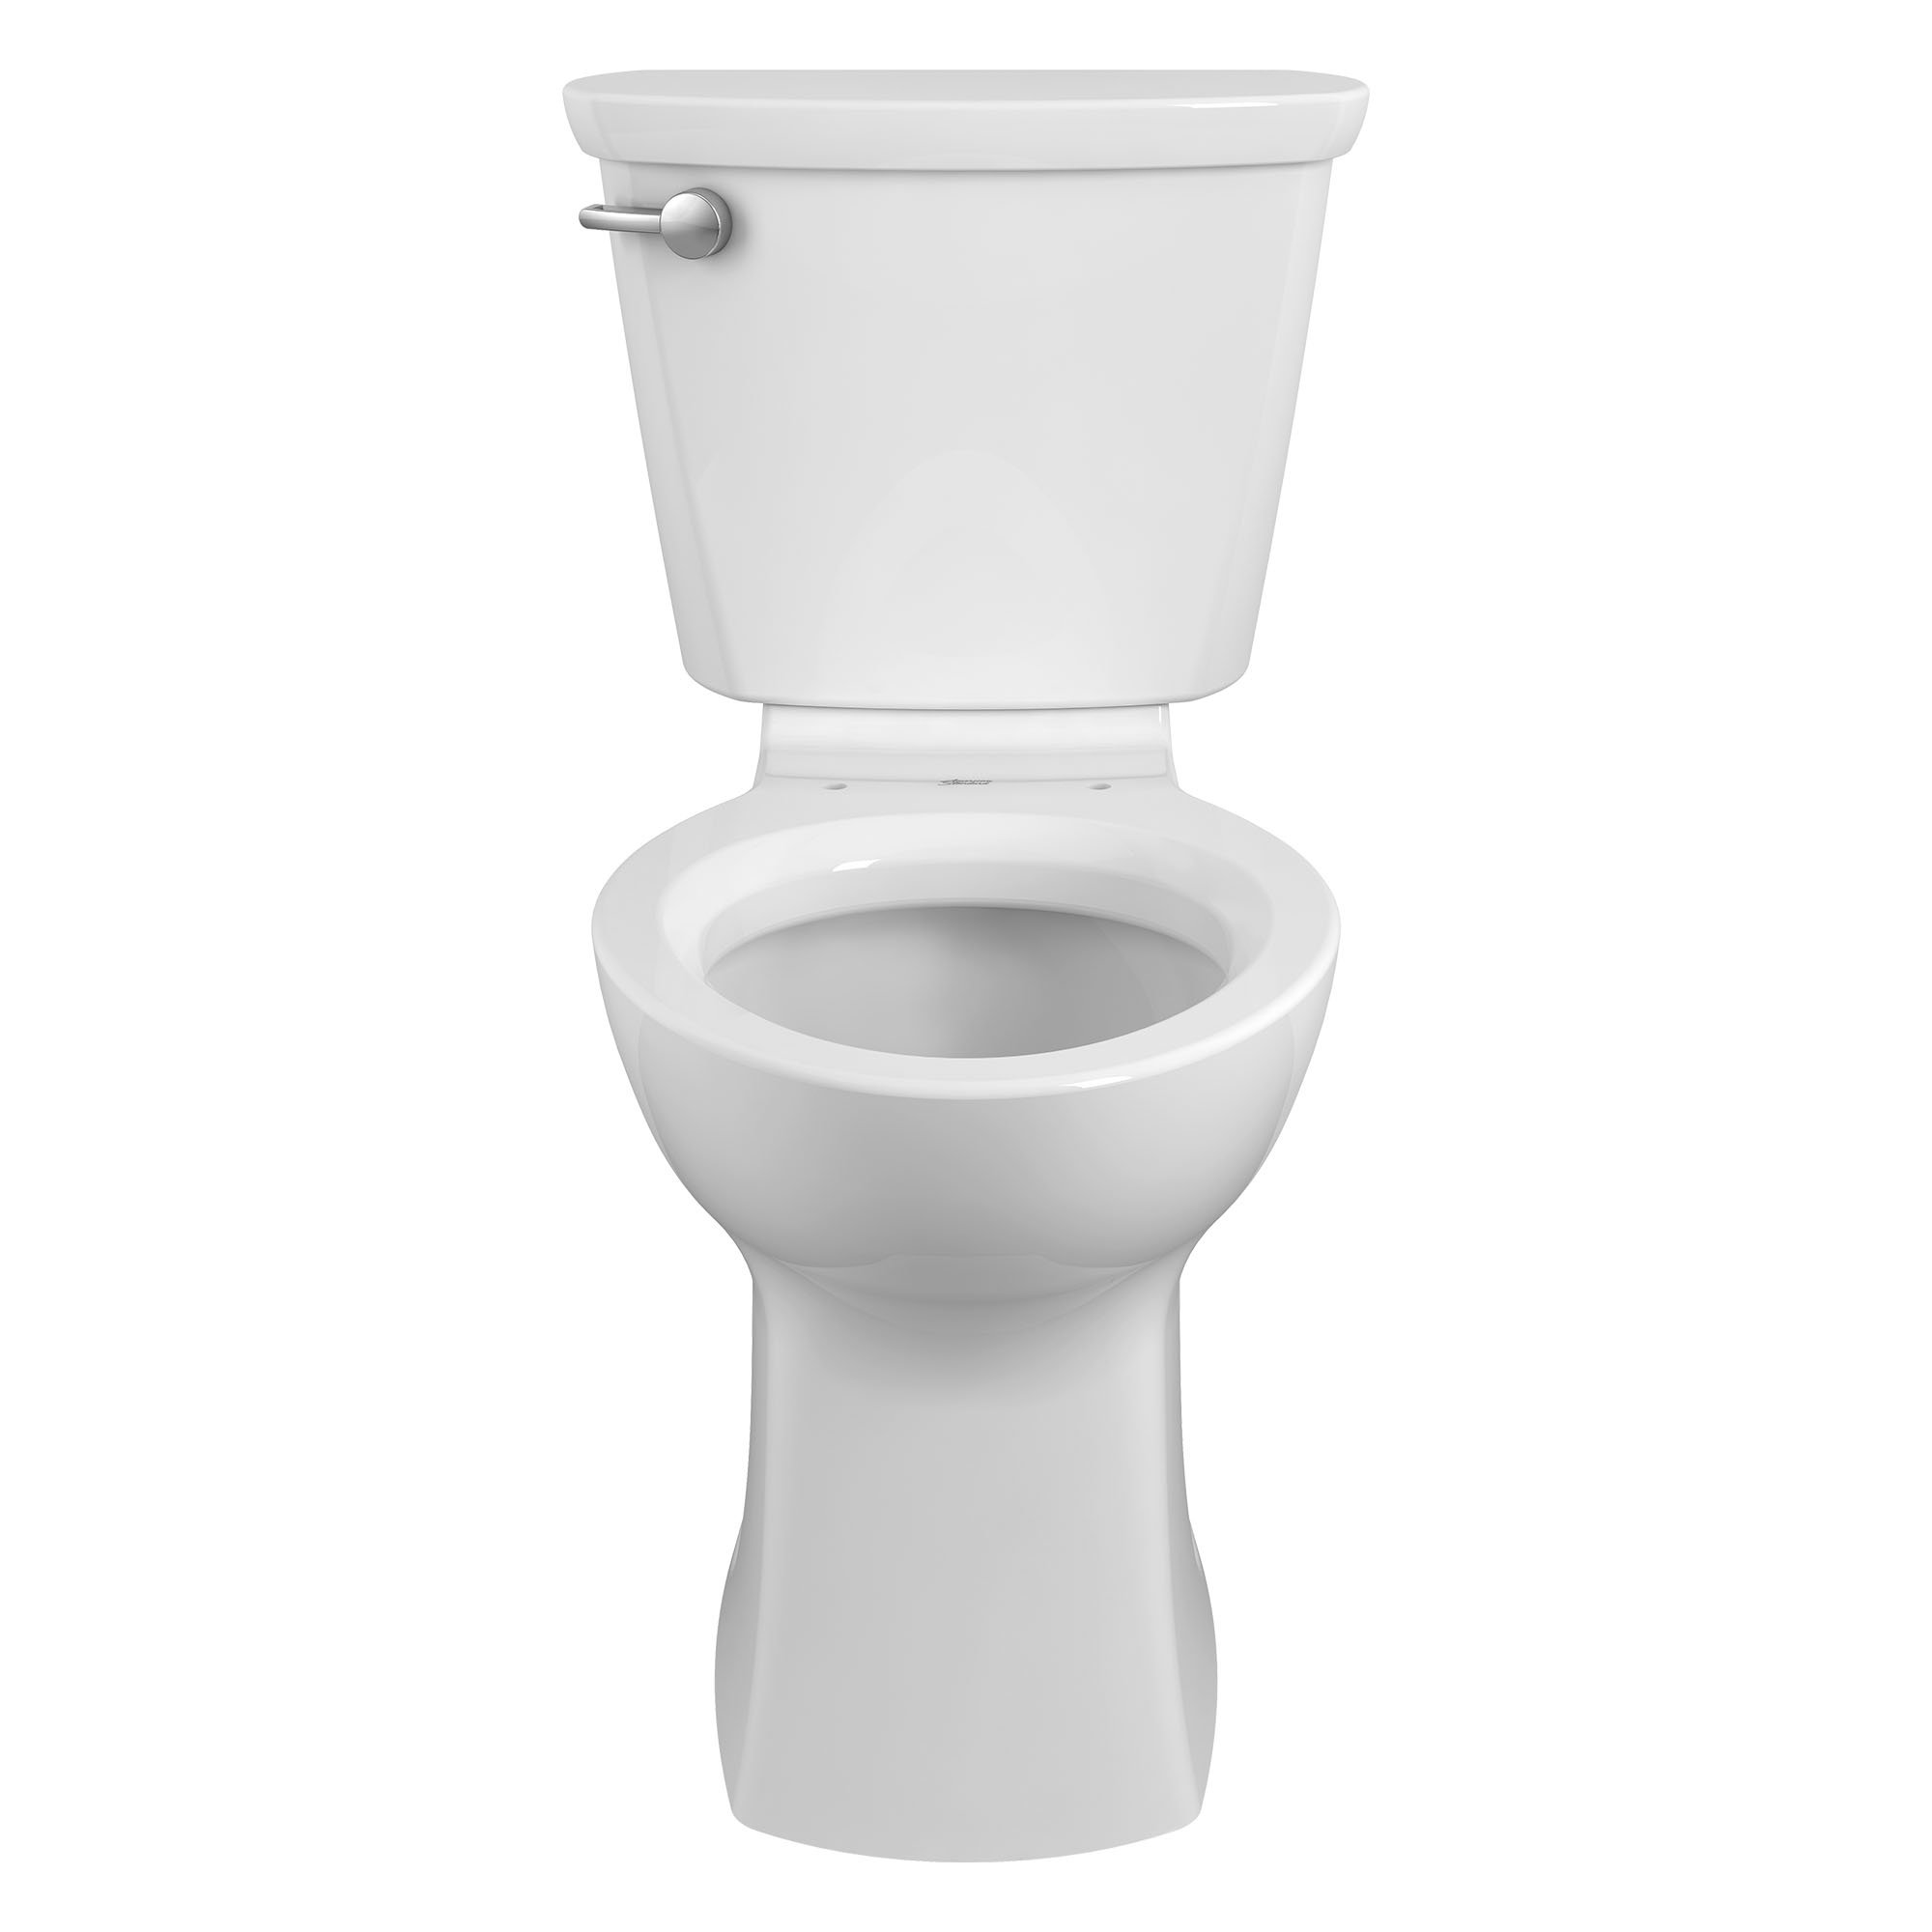 Cadet™ PRO Two-Piece 1.28 gpf/4.8 Lpf Chair Height Elongated Toilet Less Seat